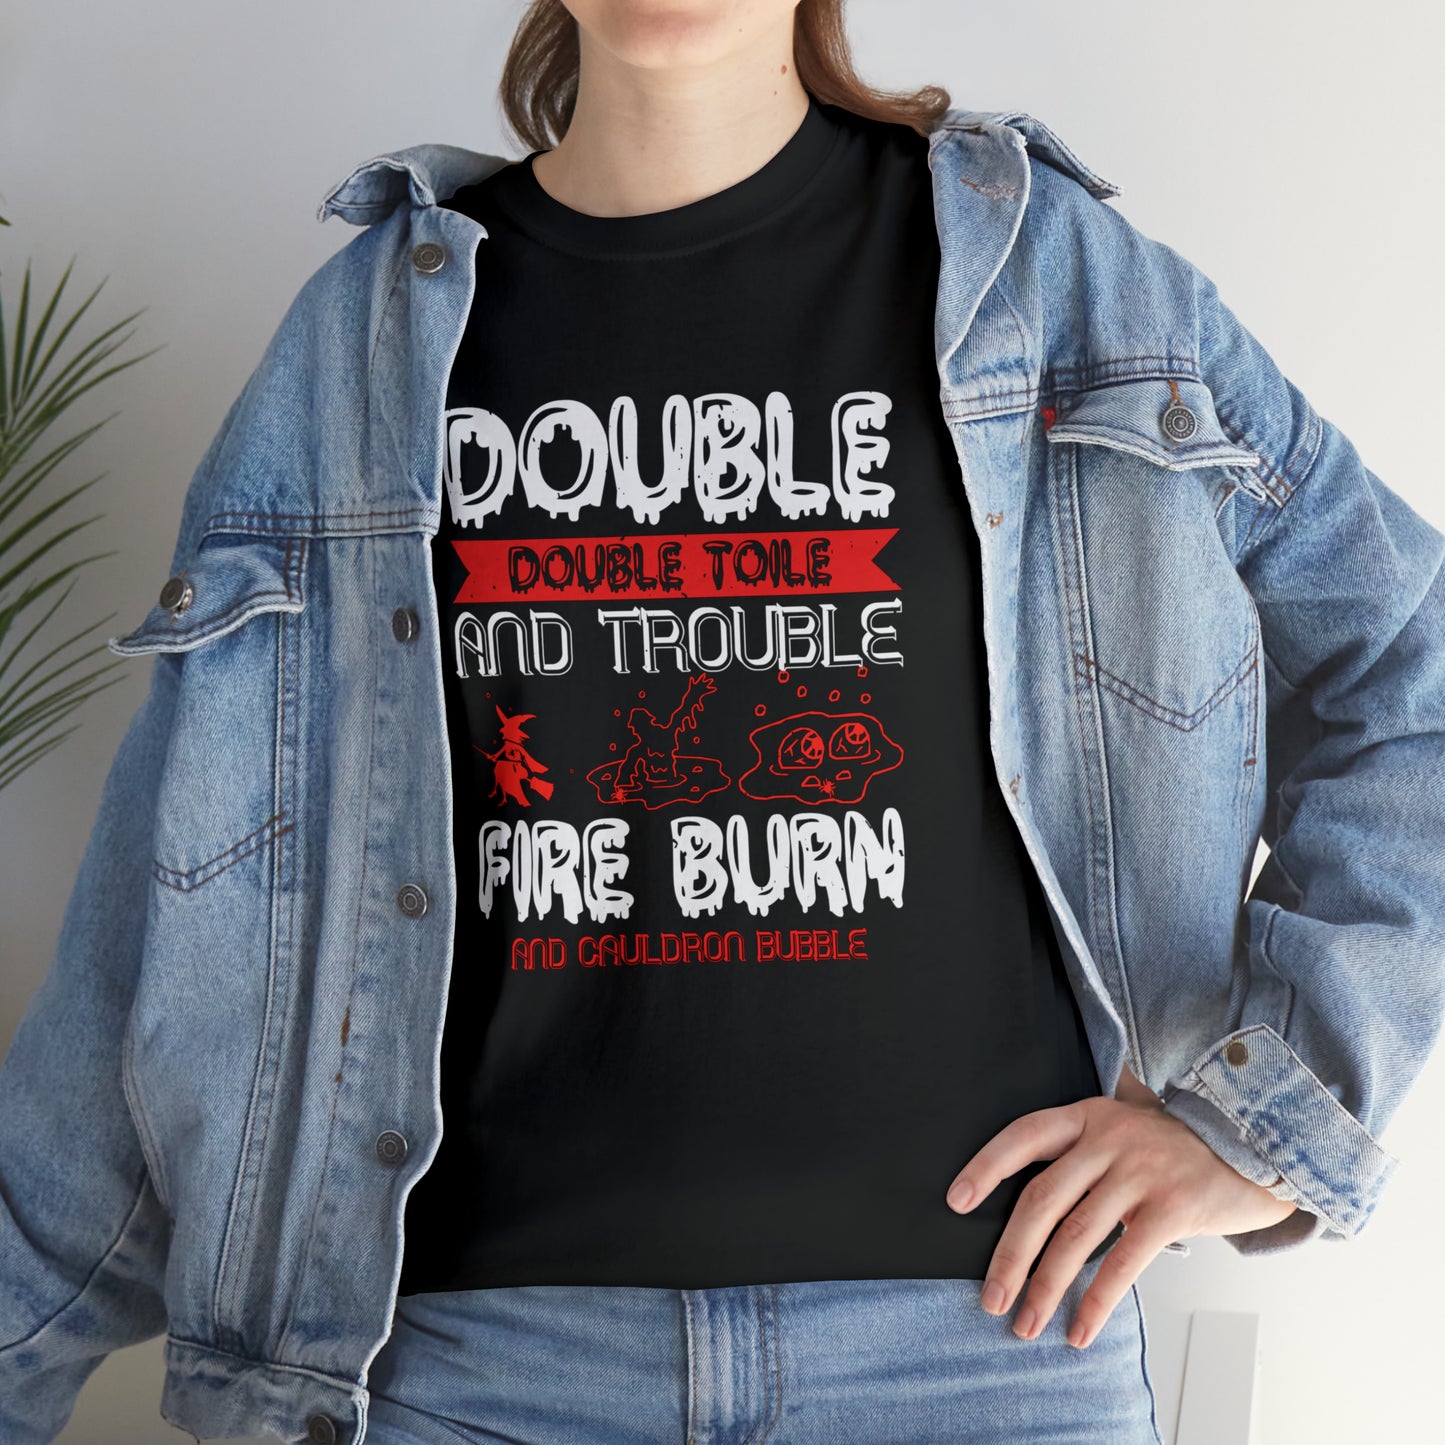 Double the Trouble in a Bubbly Cauldron Heavy Cotton Tee